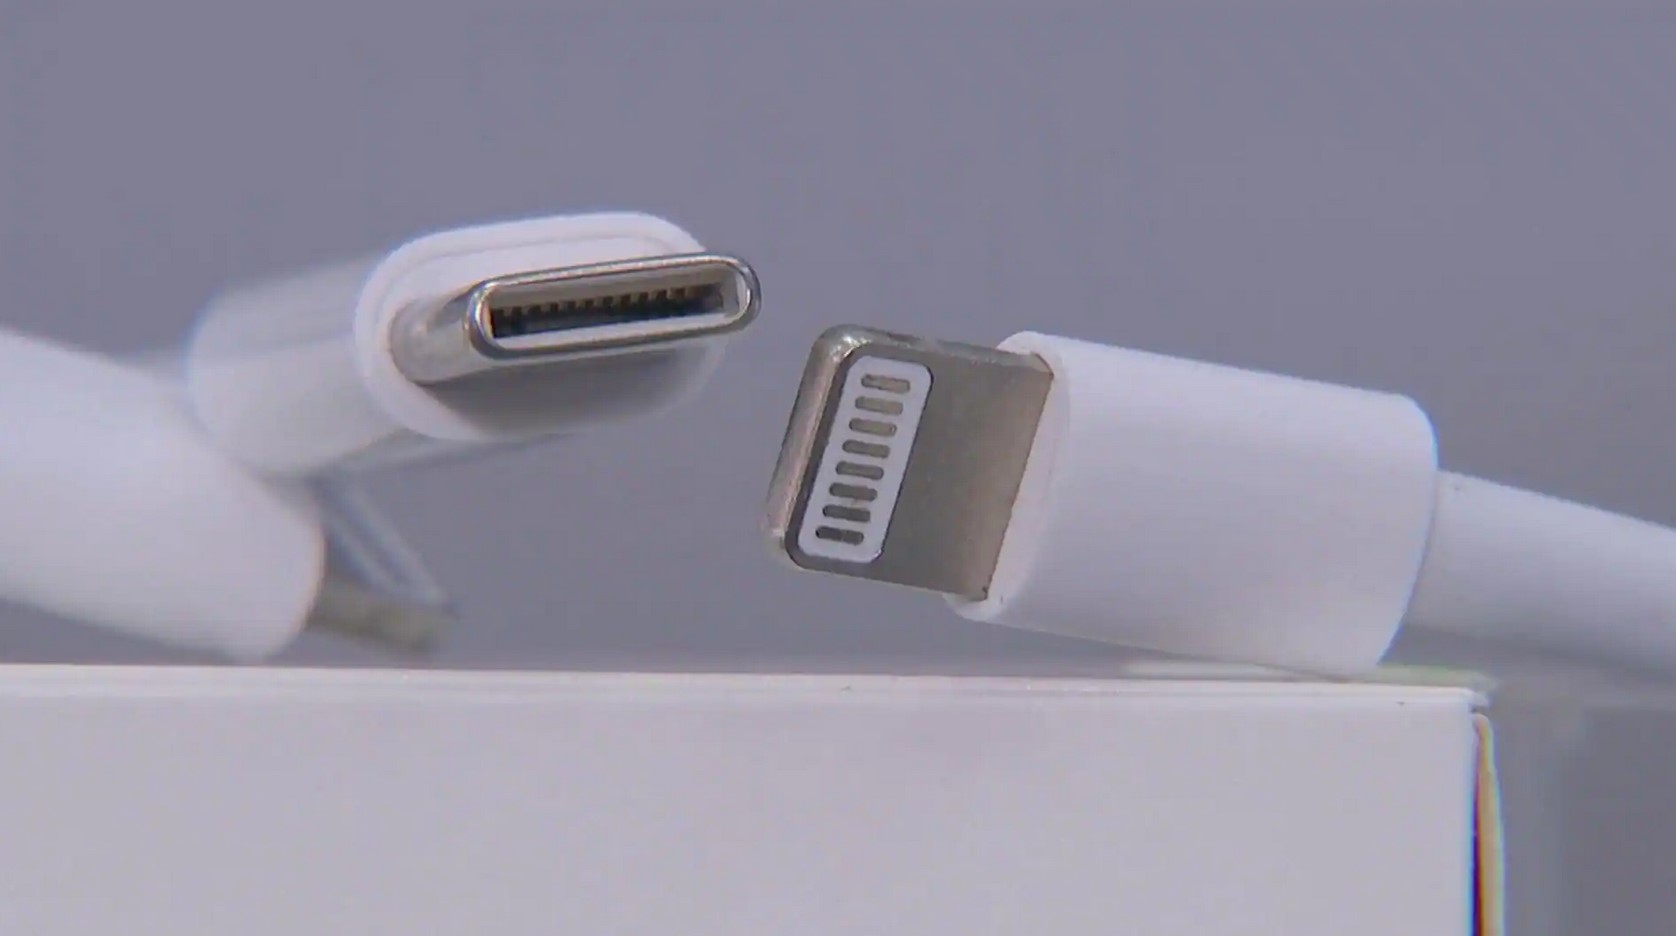 USB-C charger and cable compulsory in the EU from 2024